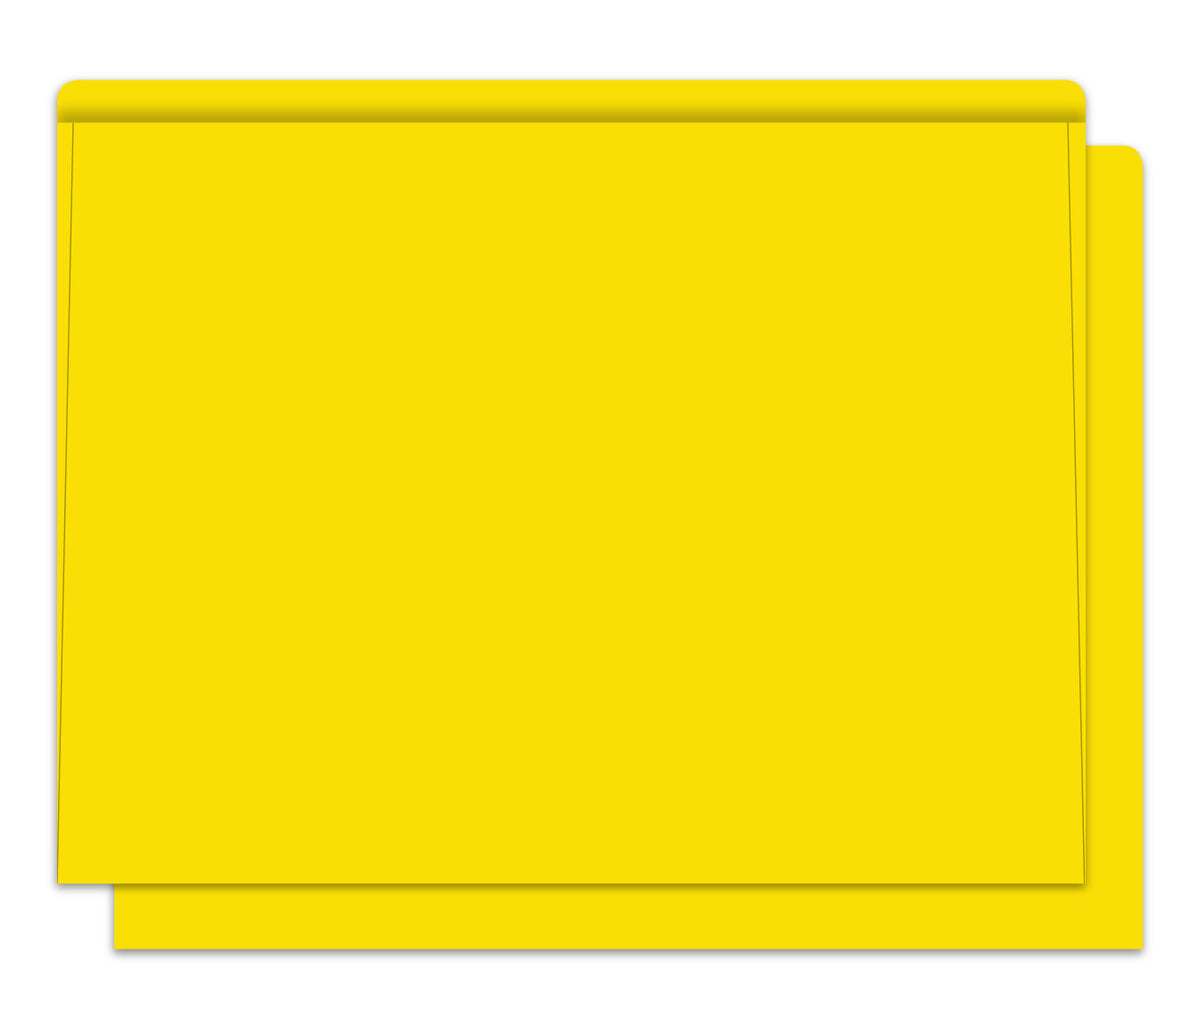 Heavy Duty Deal Envelopes (Jackets) Plain in Yellow [Packs of 100]; image is a plain, yellow-colored deal envelope. www.flywheelnw.com